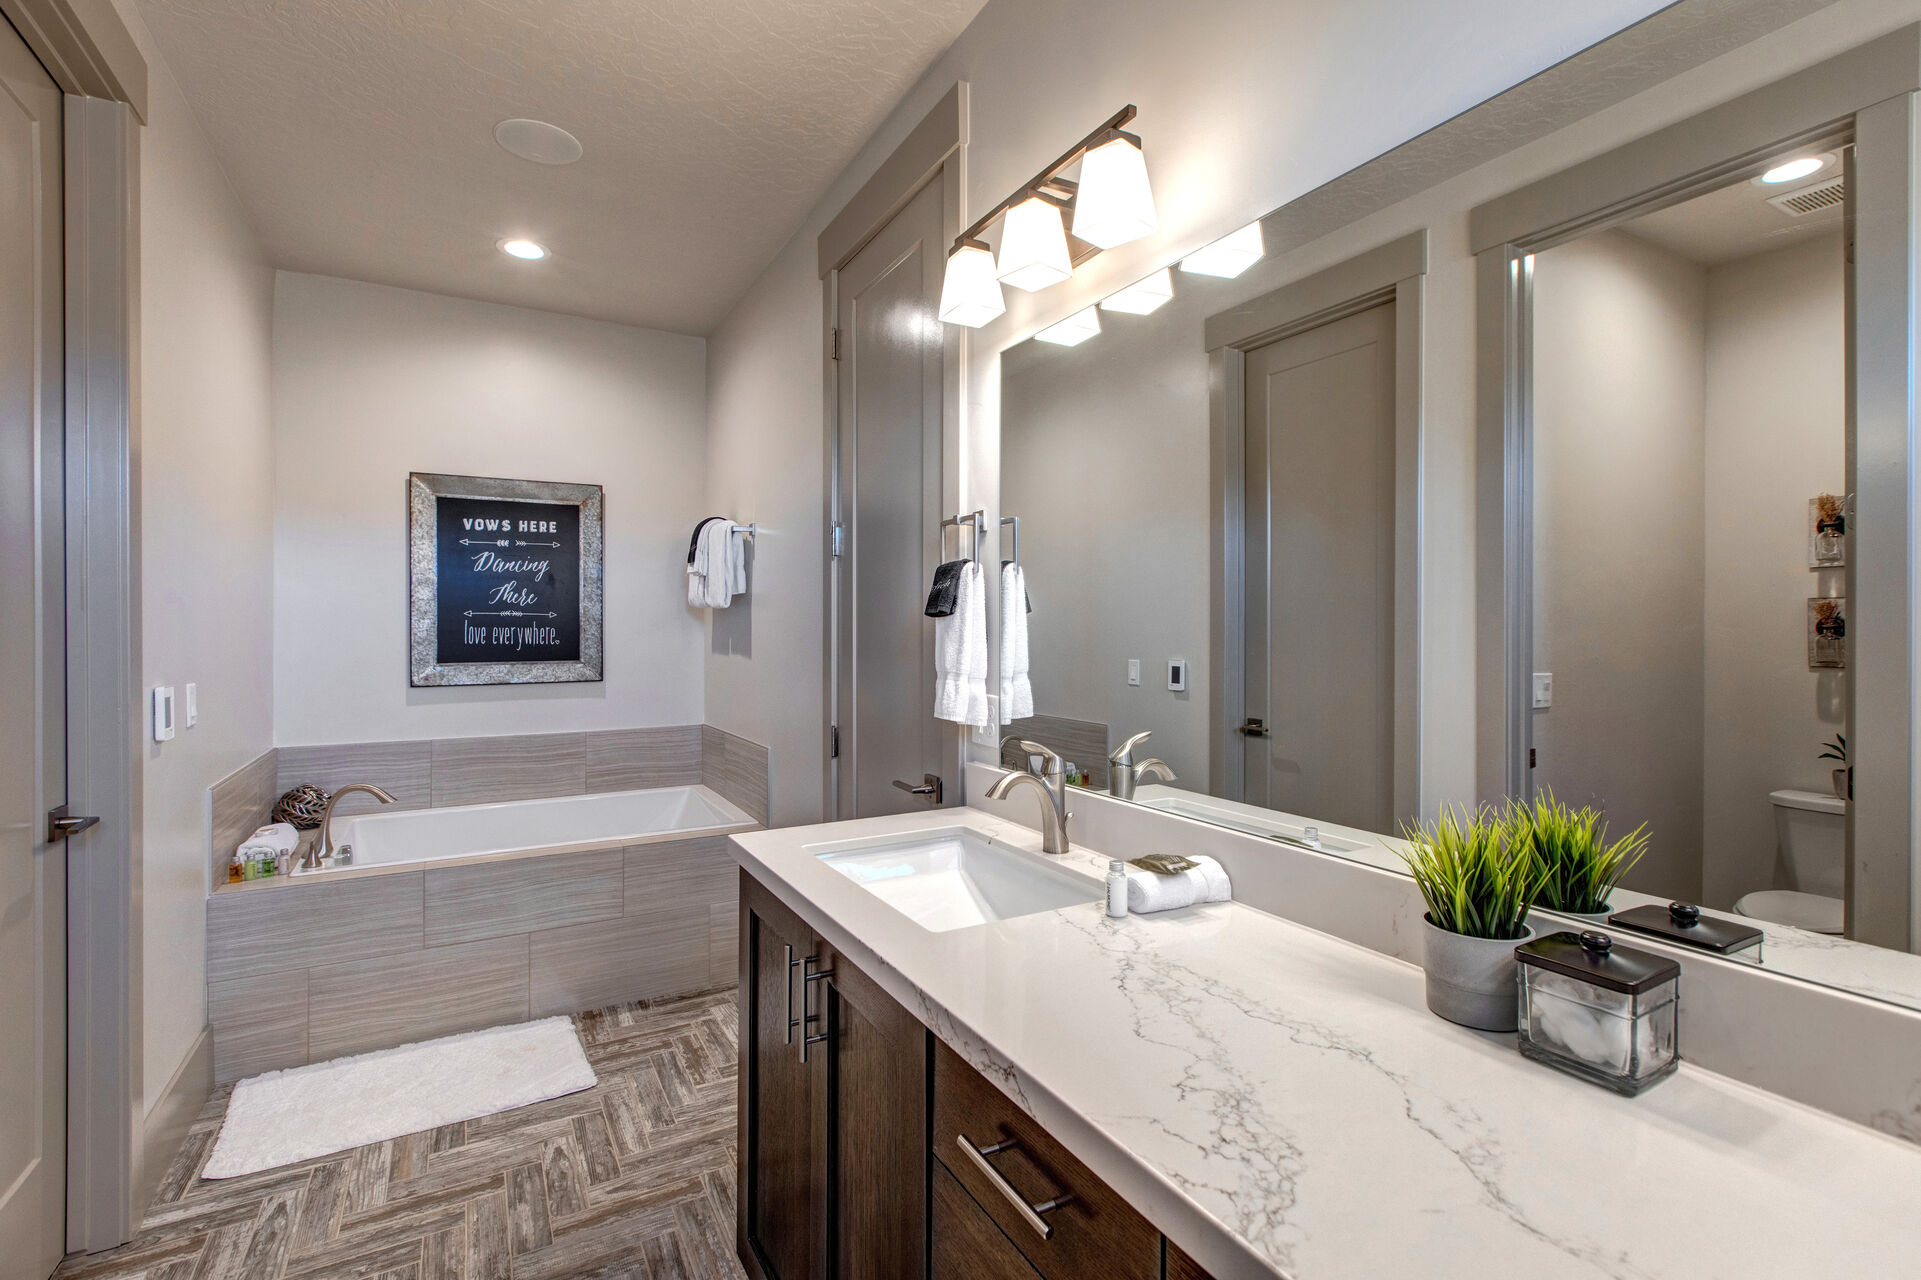 Master Bathroom with double sinks, large soaking tub, over-sized shower with seating, walk-in closet, and separate washroom